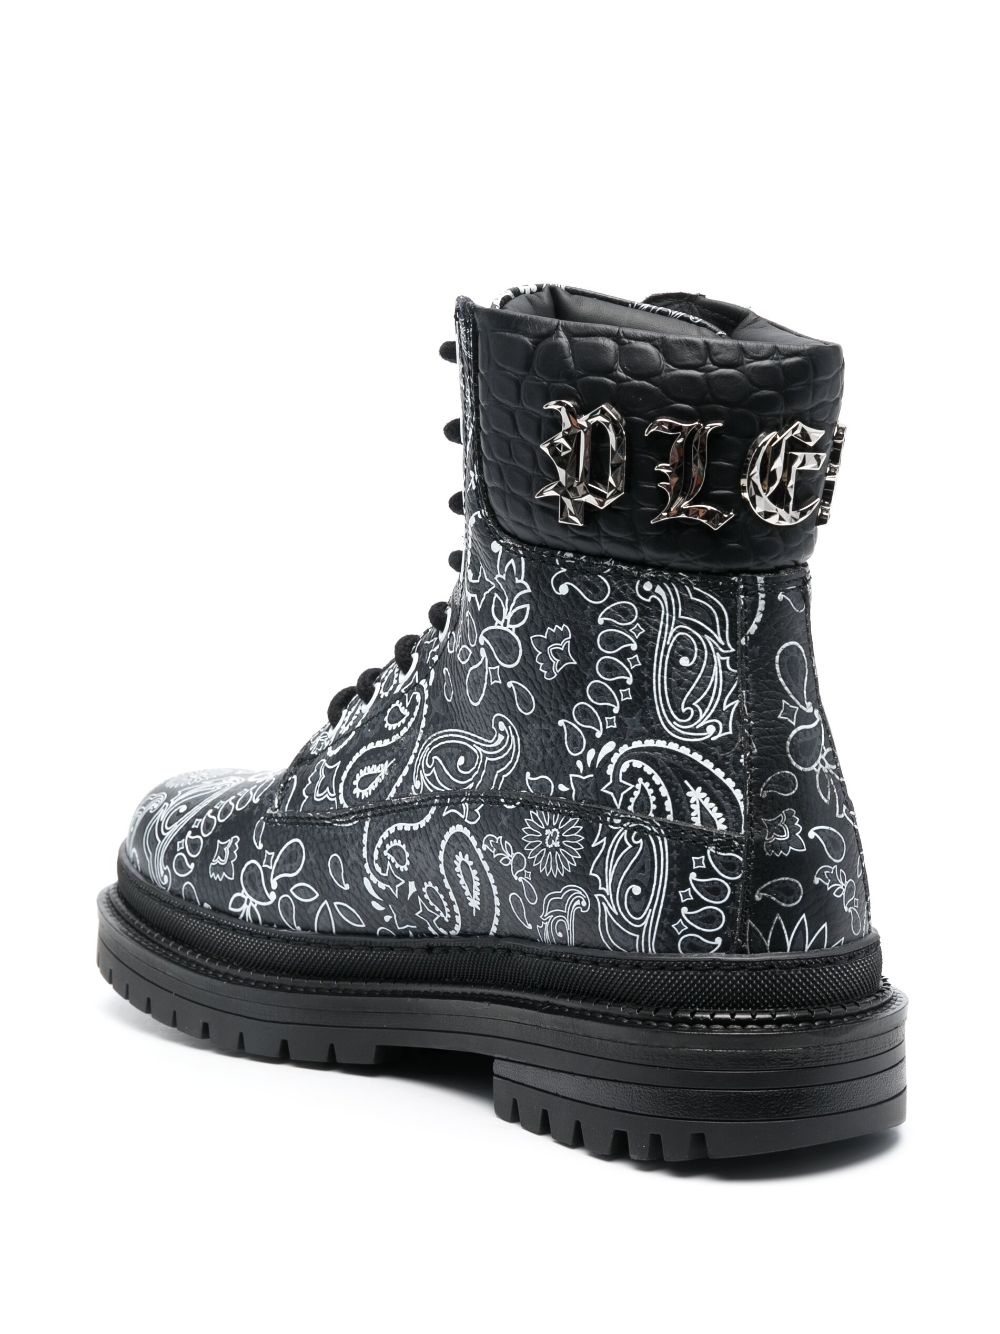 paisley-print leather ankle boots - 3